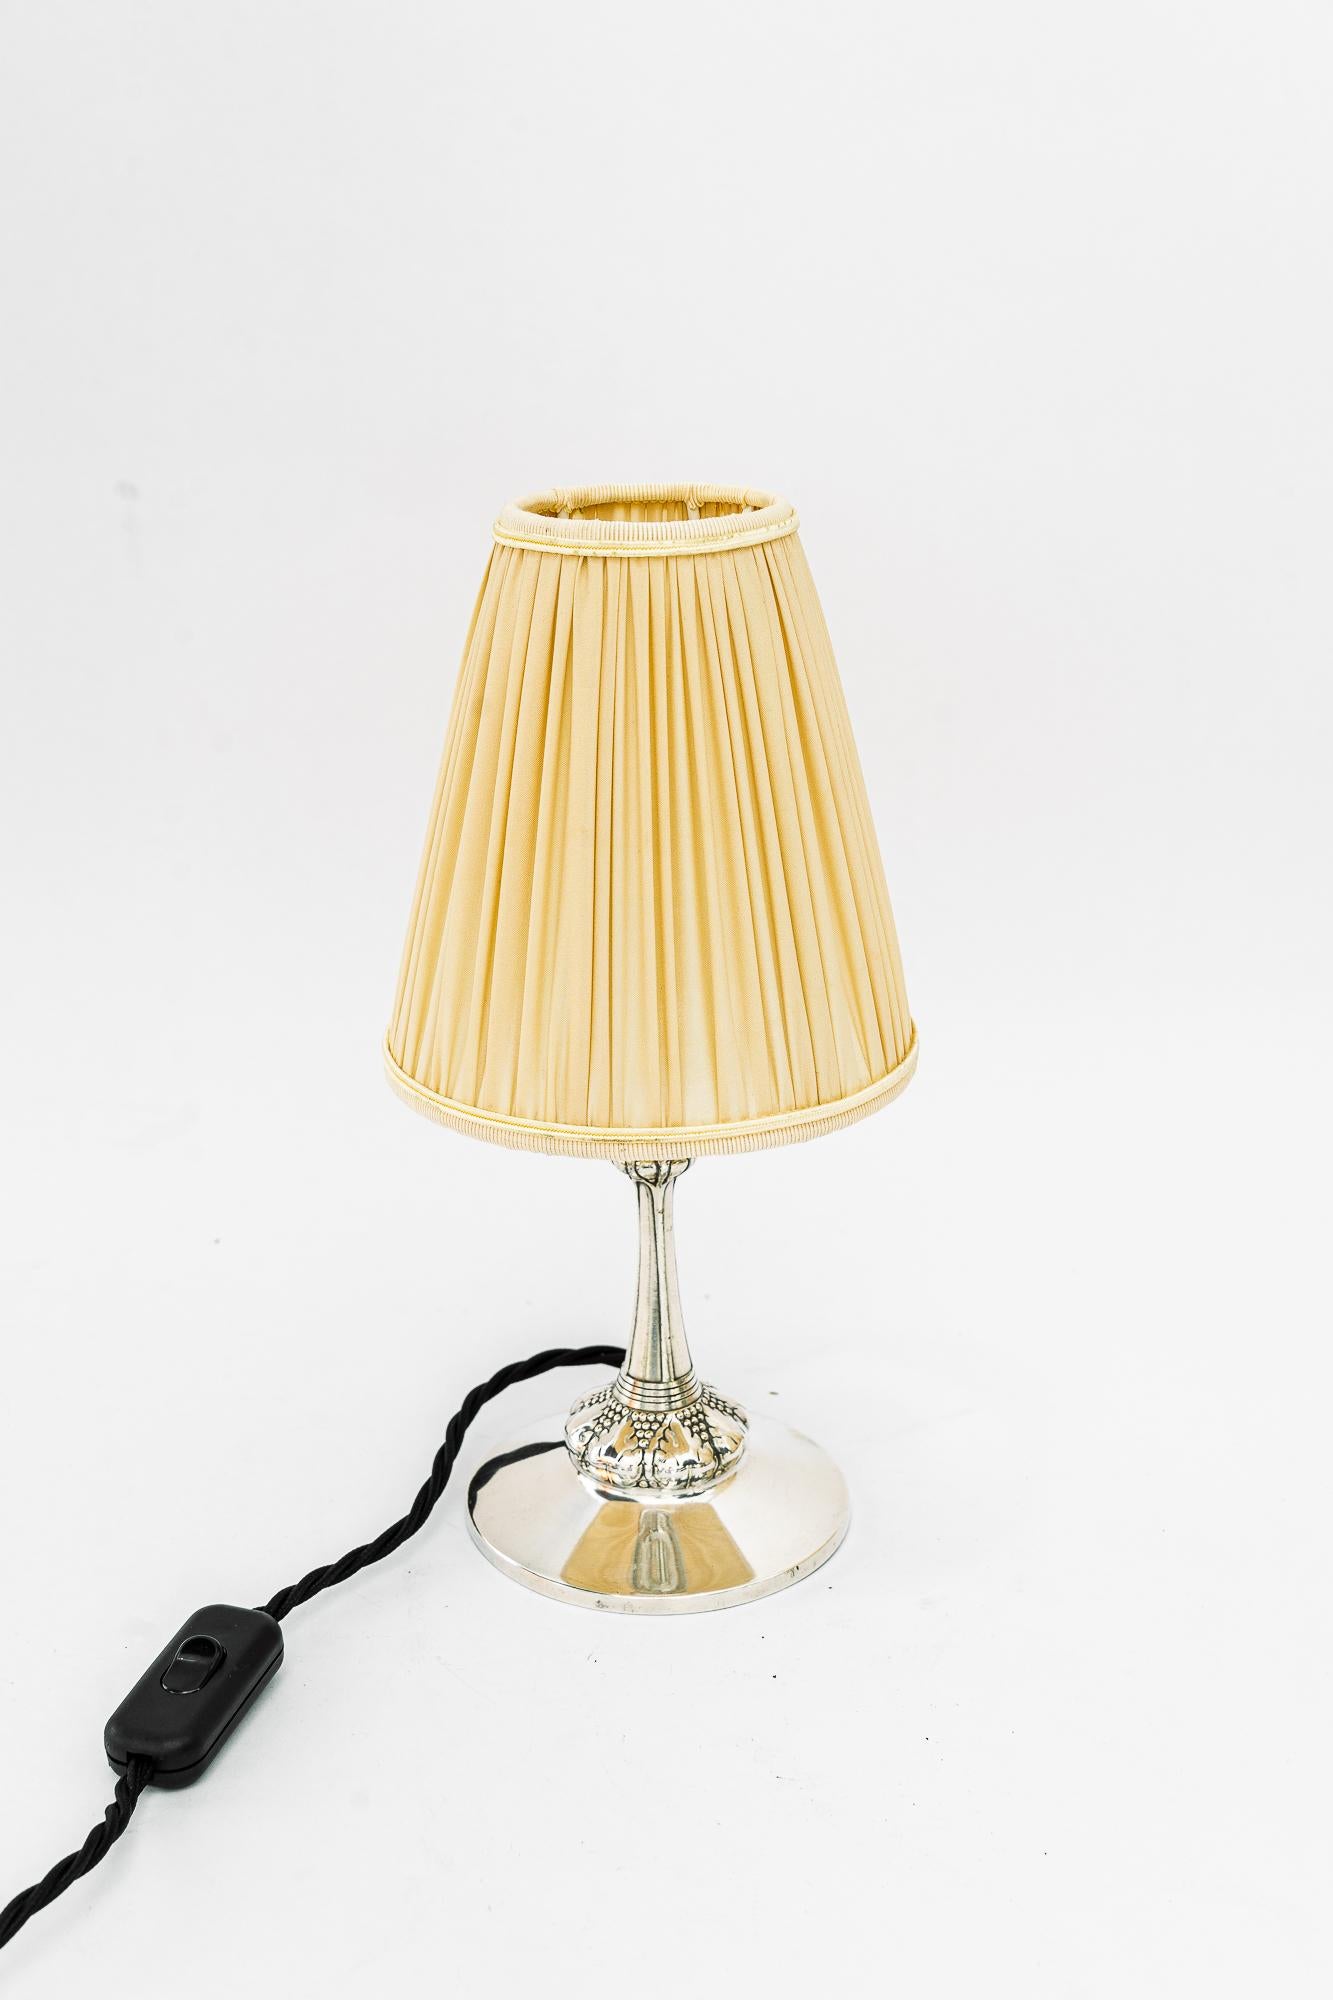 Small silvered art deco table lamp with fabric shade vienna around 1920s
The fabric shade is replaced ( new )
Original condition